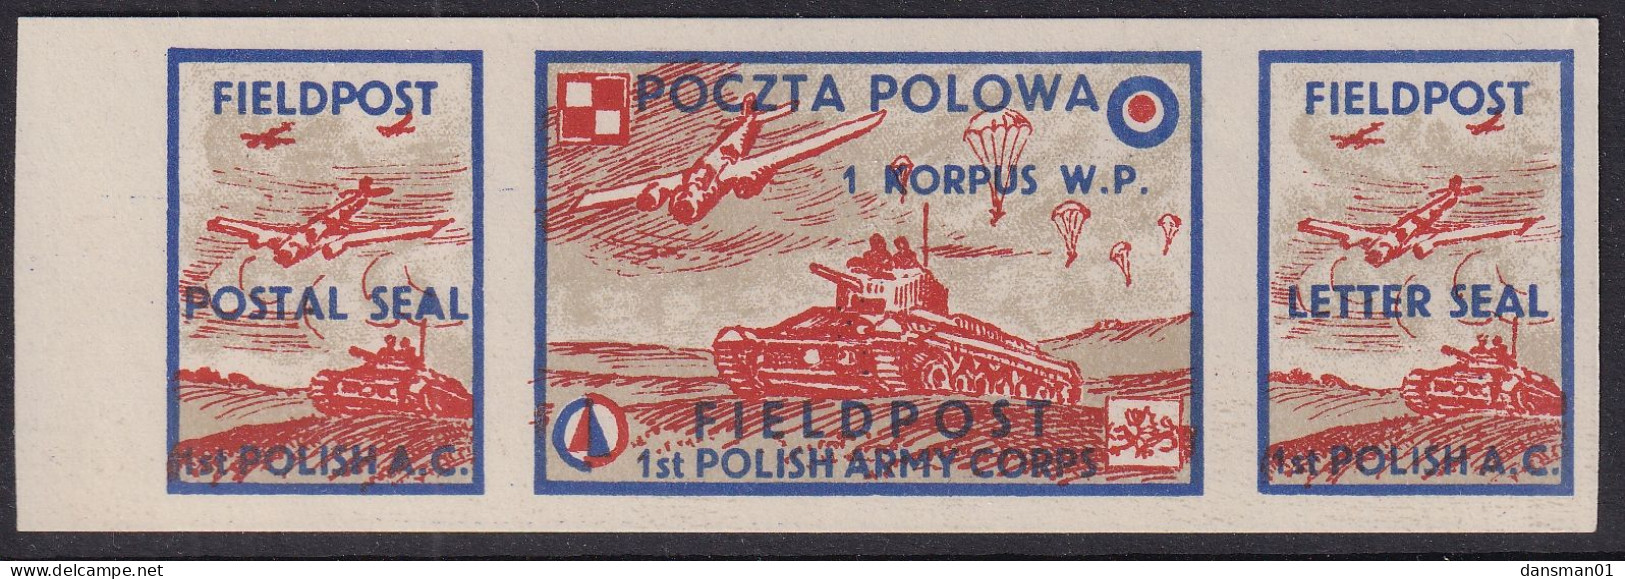 POLAND 1942 Field Post Seals Strip Smith FL2-4 Mint Never Hinged (white Paper) - Liberation Labels